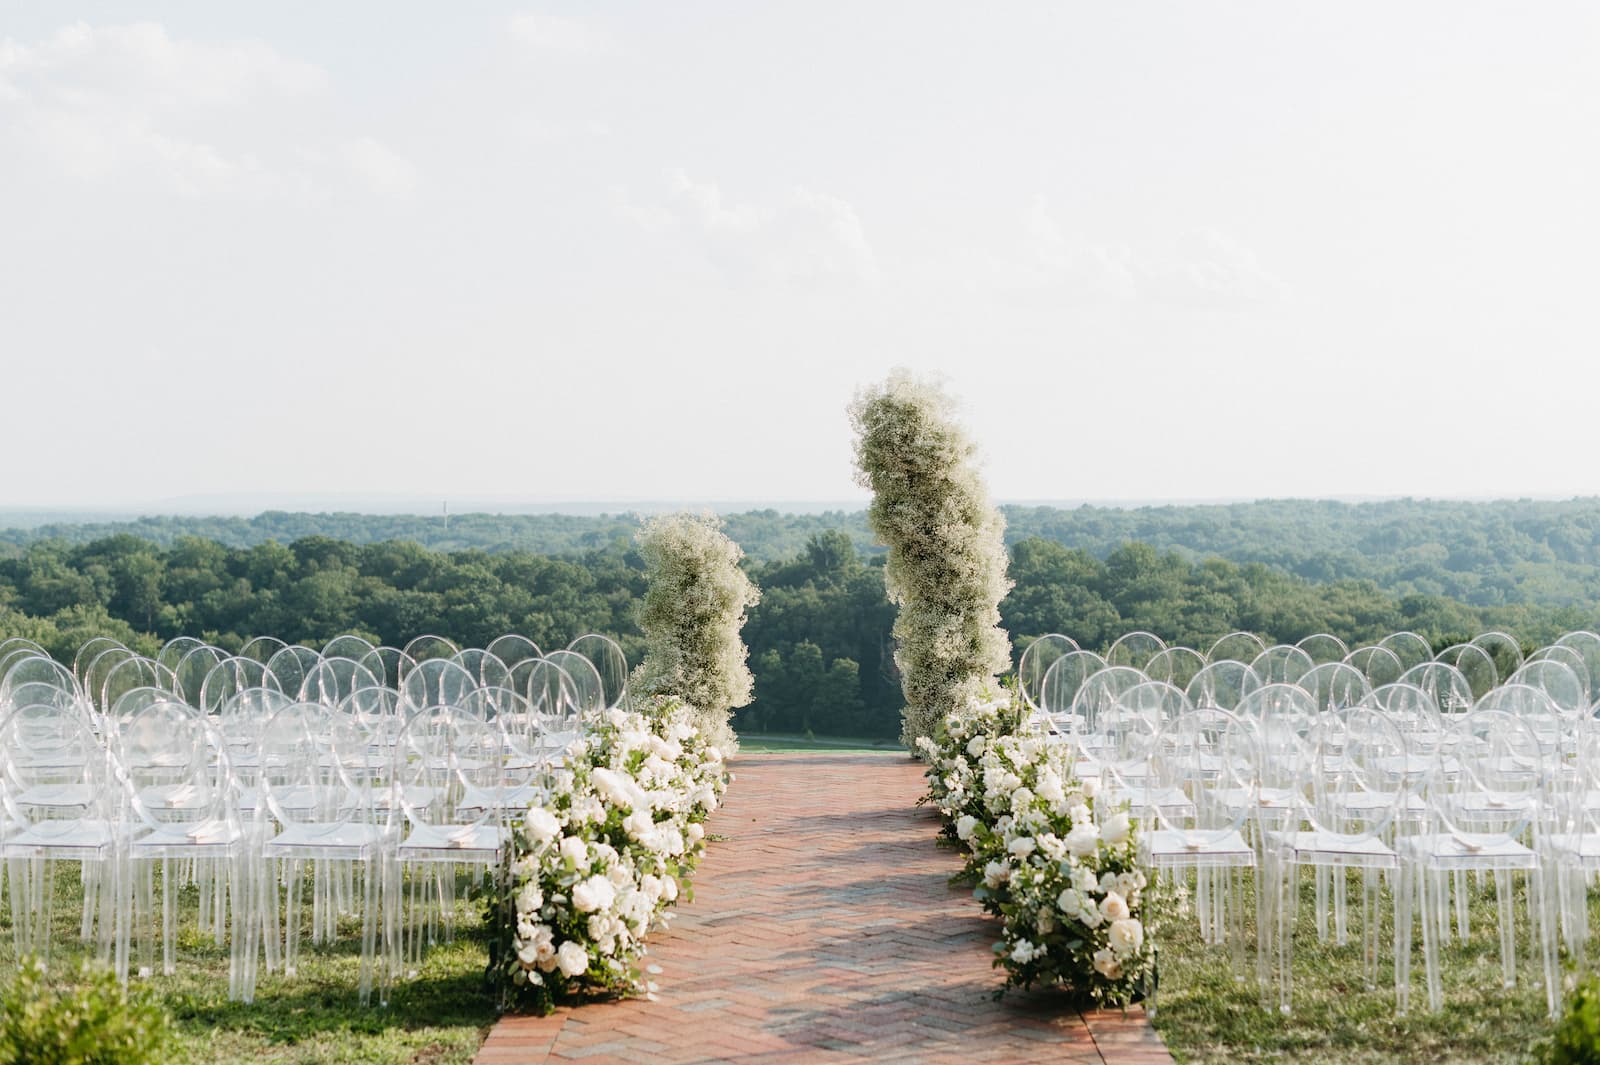 Rows of clear chairs set up for the ceremony outside overlooking rolling hills and a two piece floral archway in the front with white and green flowers.